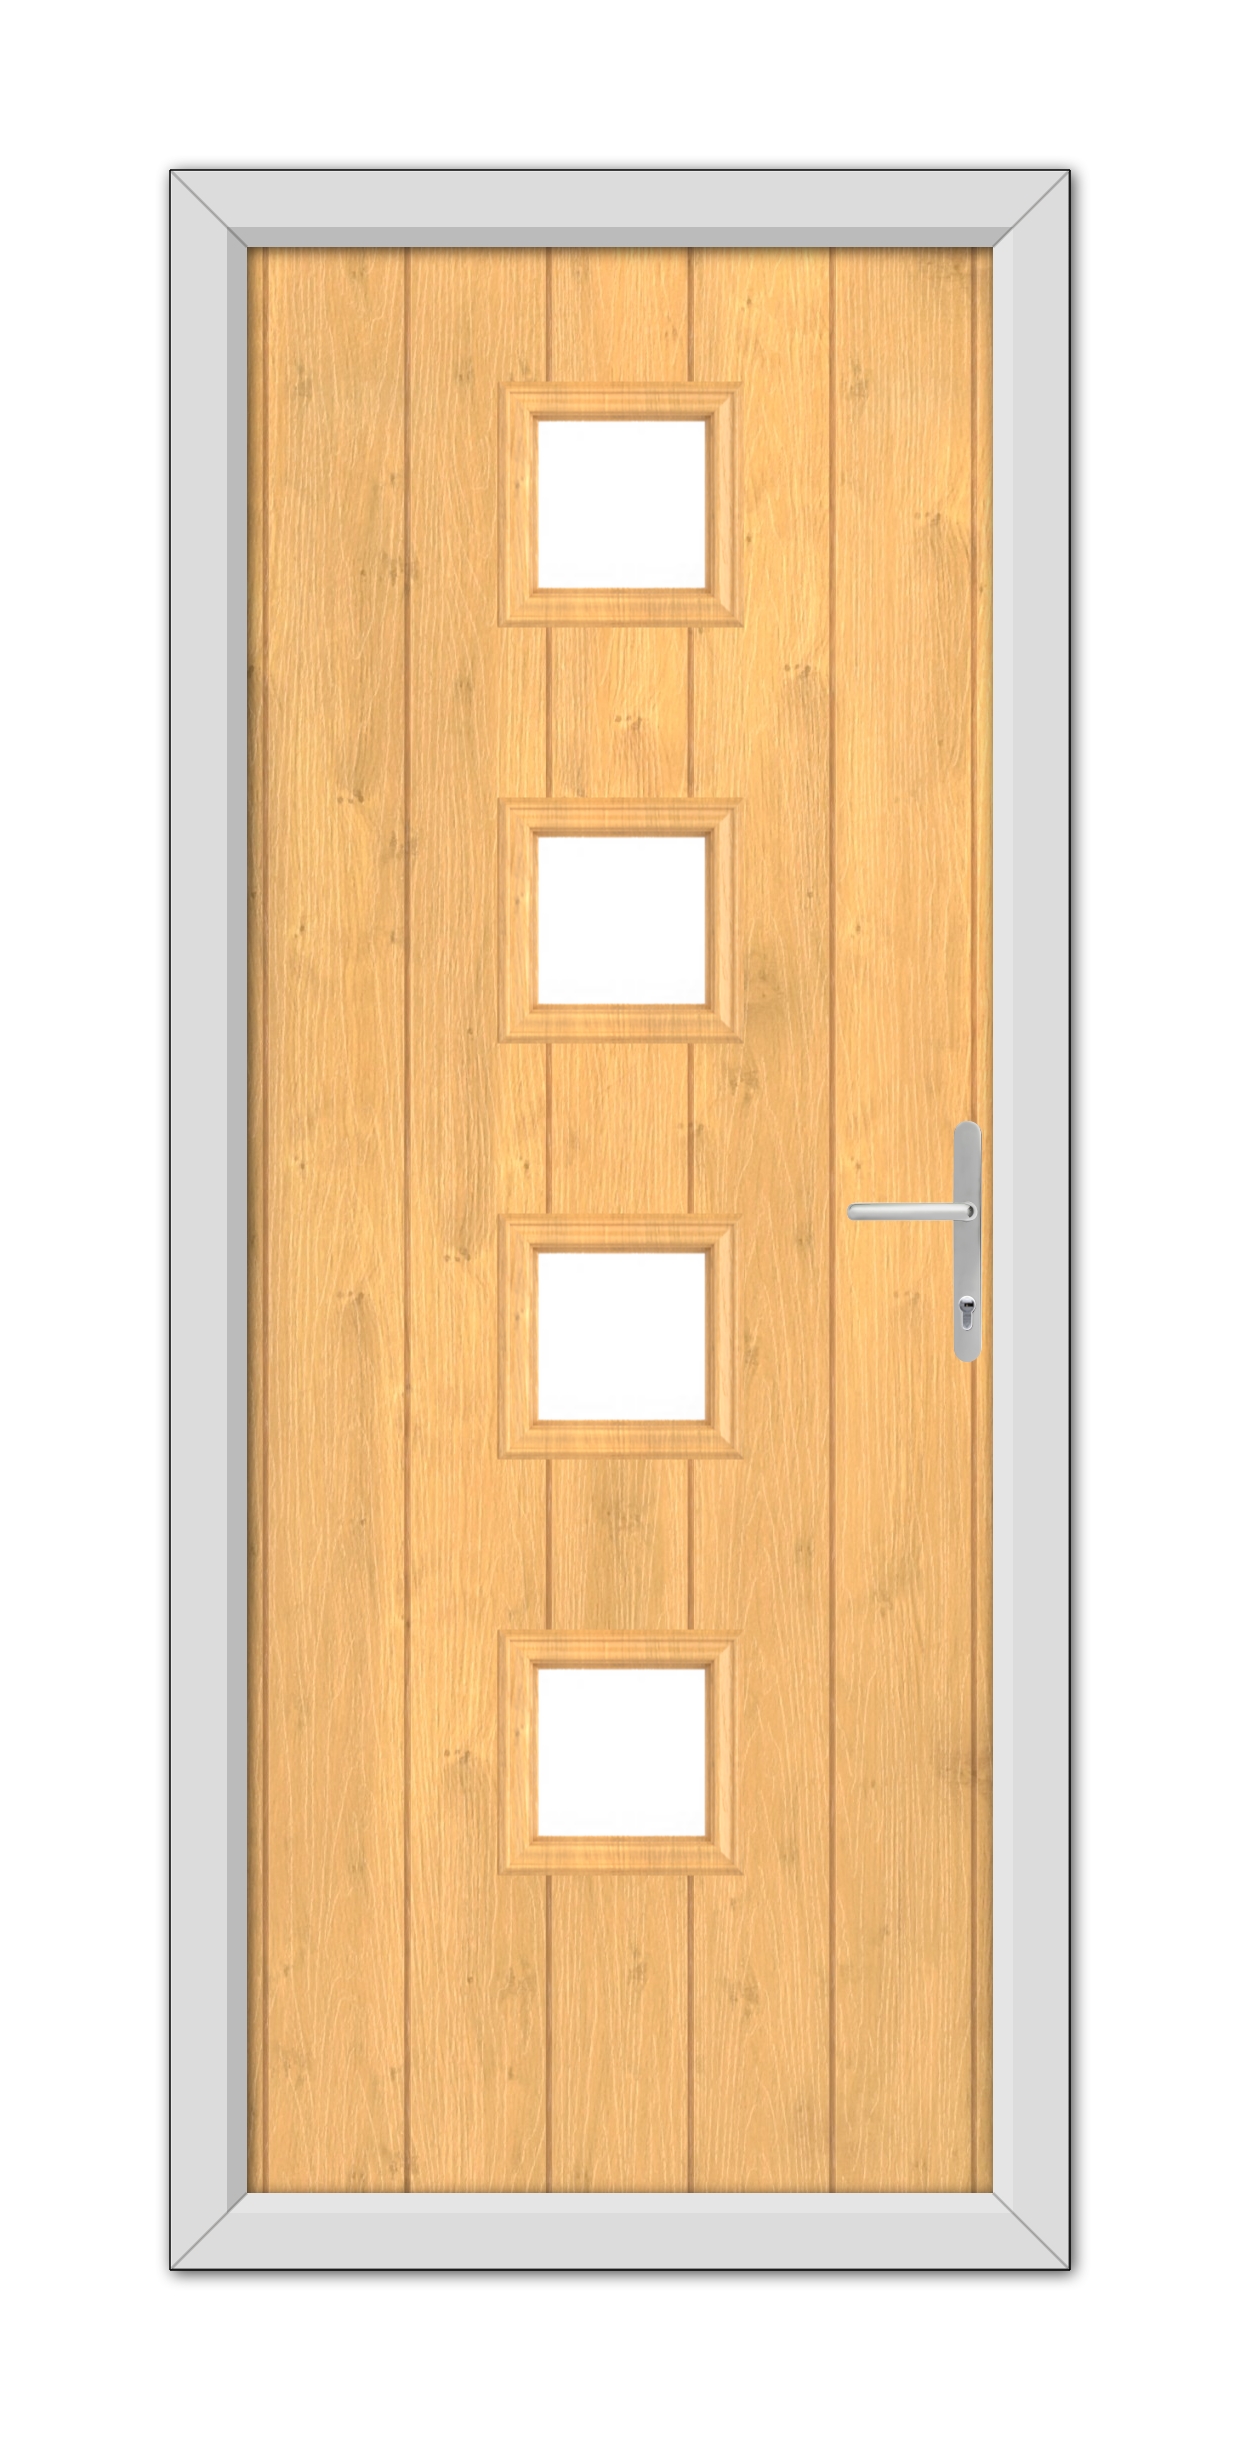 An Irish Oak Hamilton Composite Door 48mm Timber Core with a metal frame, featuring four rectangular windows and a modern handle, isolated on a white background.